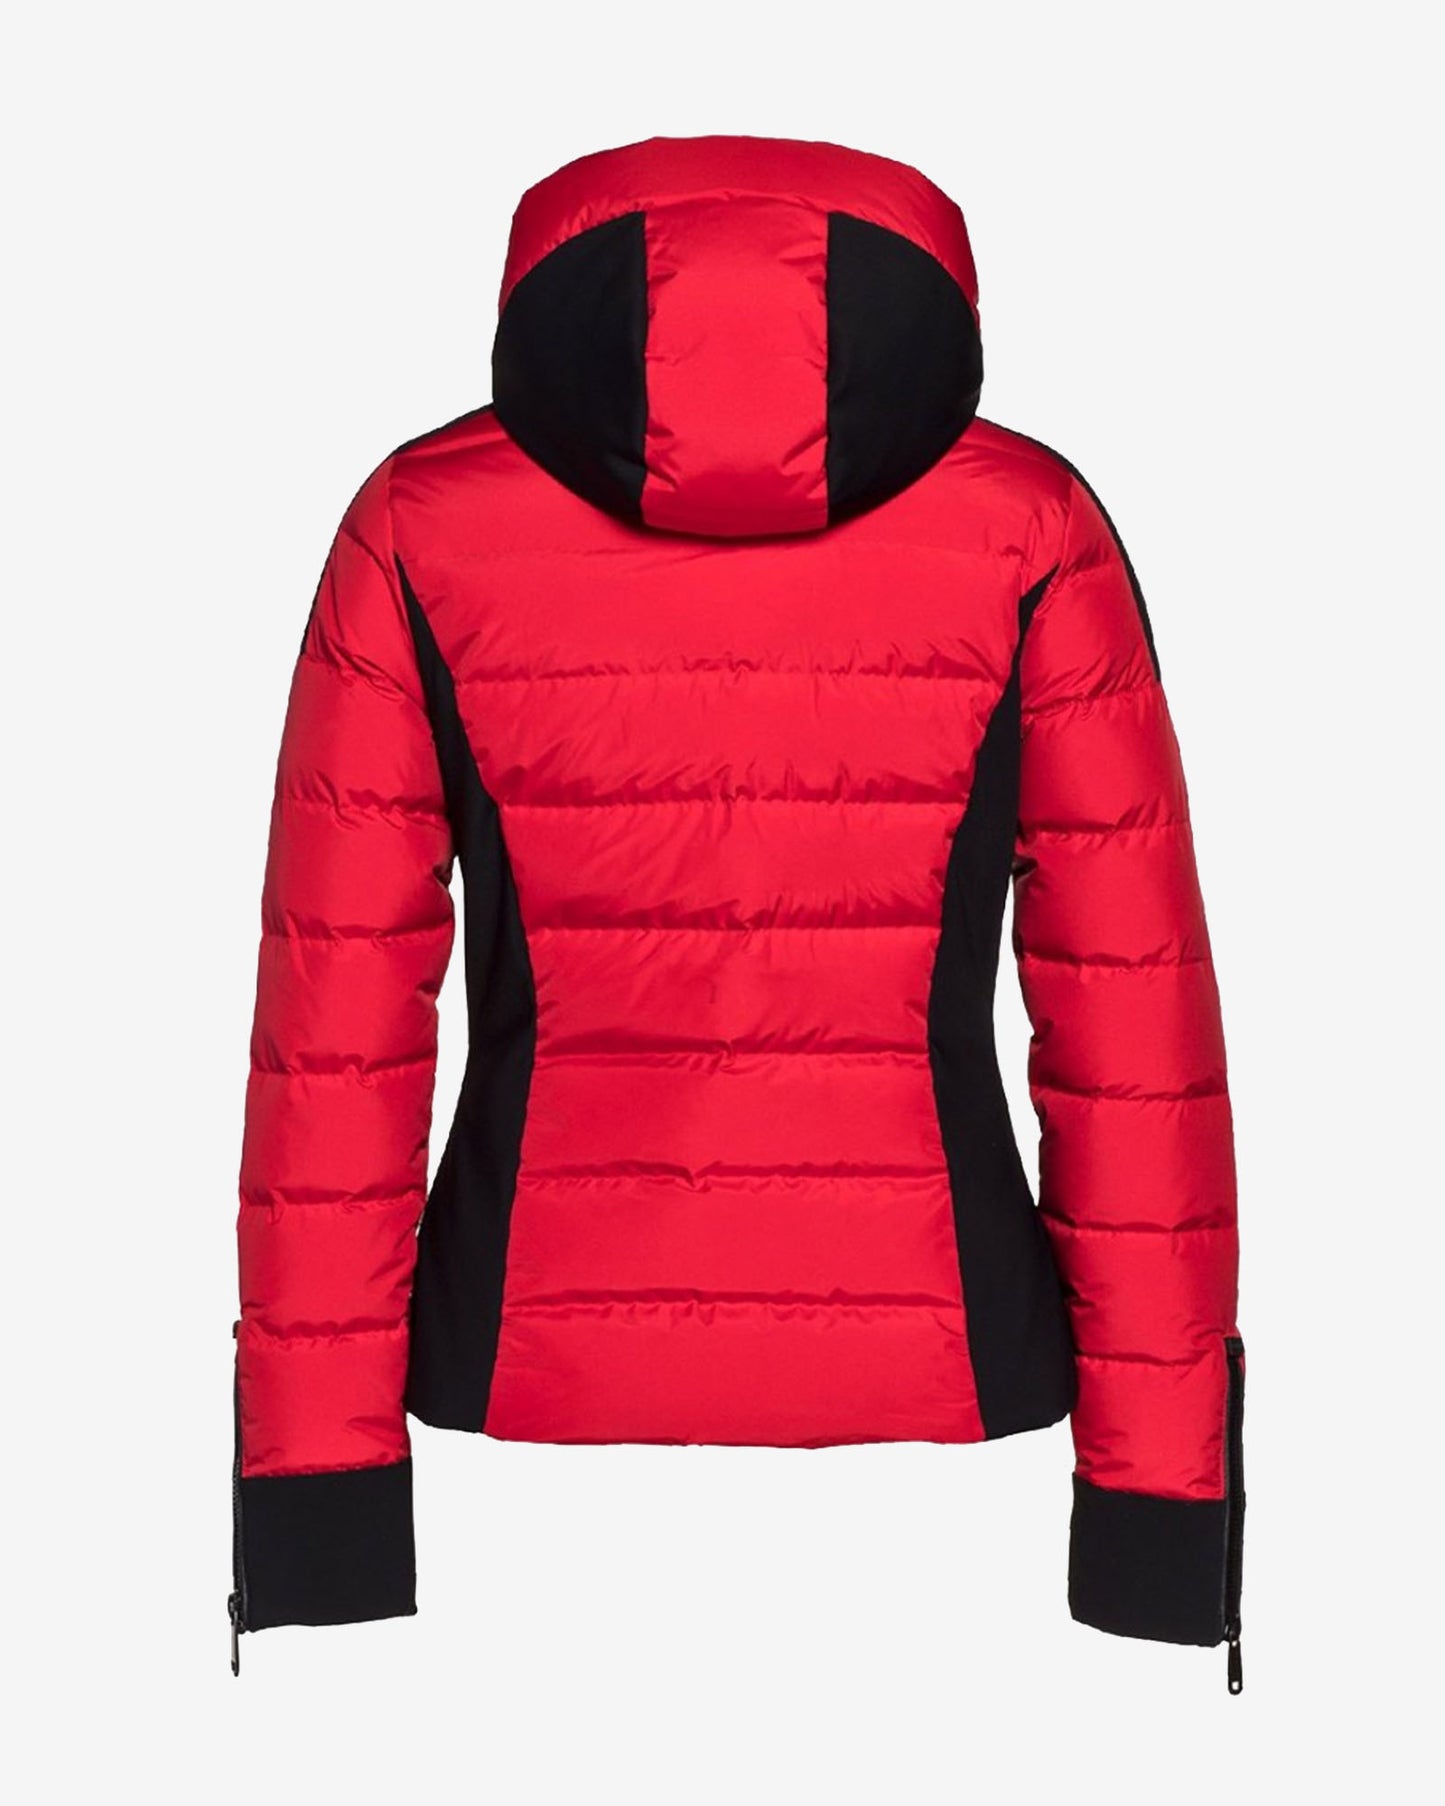 Downfilled Ski Jacket with hood